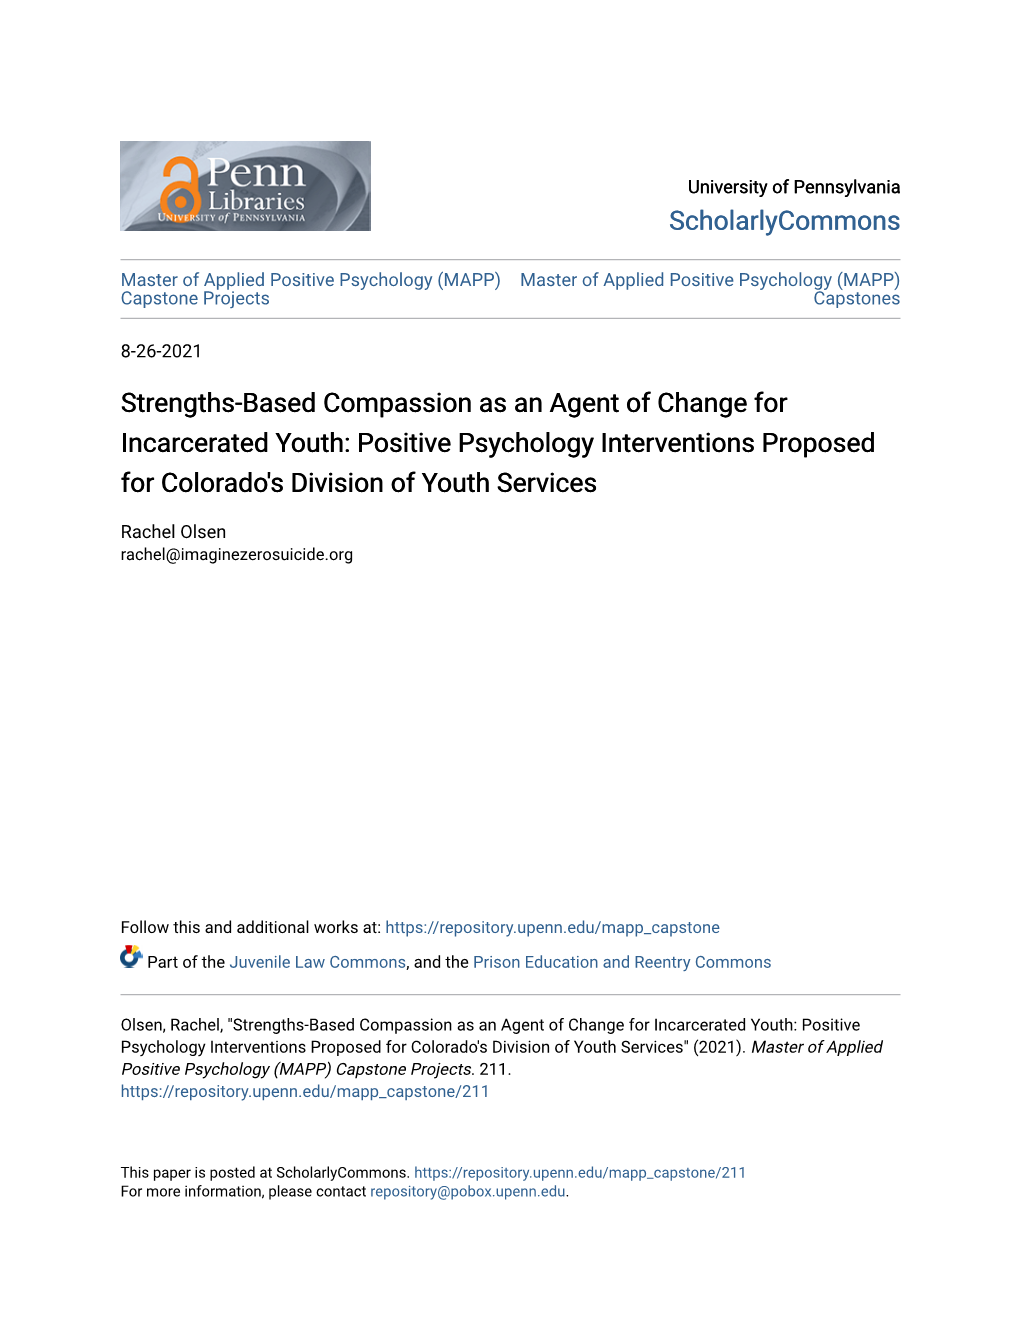 Positive Psychology Interventions Proposed for Colorado's Division of Youth Services